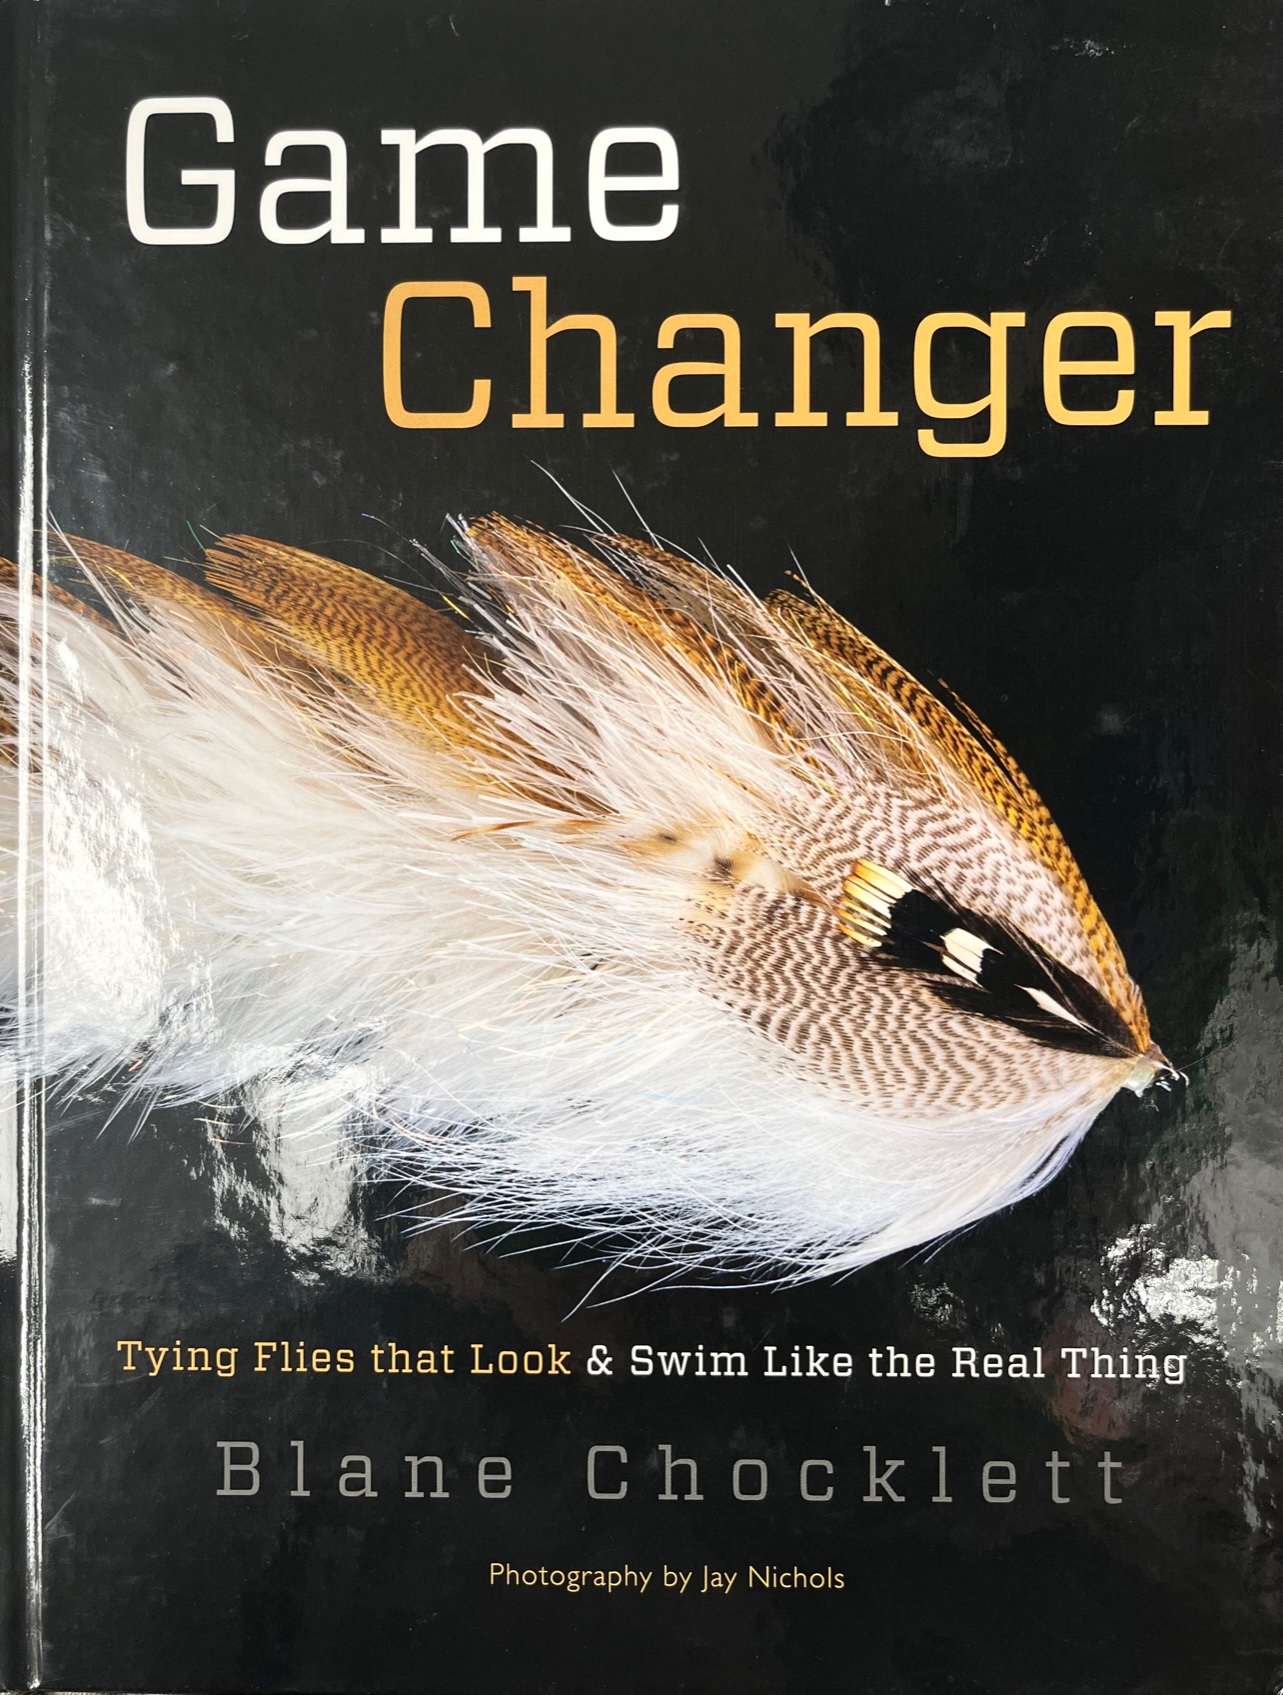 Game Changer - by Blane Chocklett (Hard Cover)